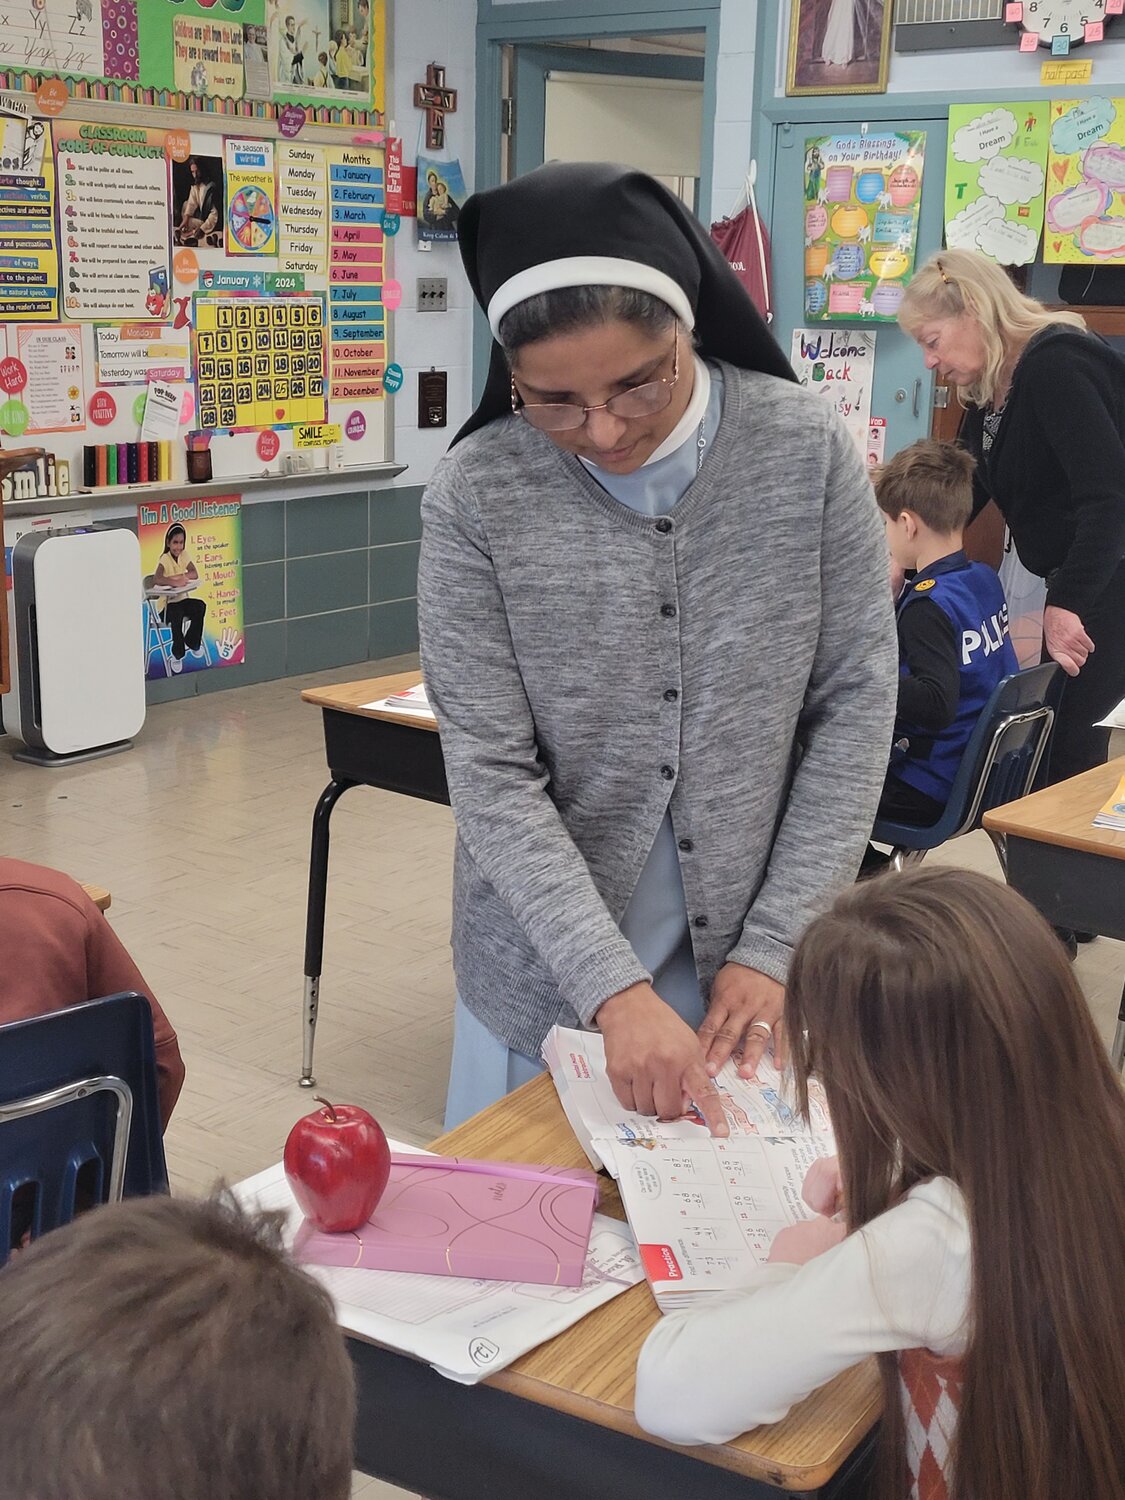 POWER OF PRAYER: St. Rocco’s Sister Daisy Kollamparampil was seriously injured in the Atwood Avenue crosswalk outside the school on Nov. 7, when a driver failed to stop, rear-ending another driver and pushing that vehicle into the crosswalk. Sr. Daisy was struck and sent to the hospital, but she’s convinced the prayers she received from the community helped her recover fast and get back to work teaching second grade.